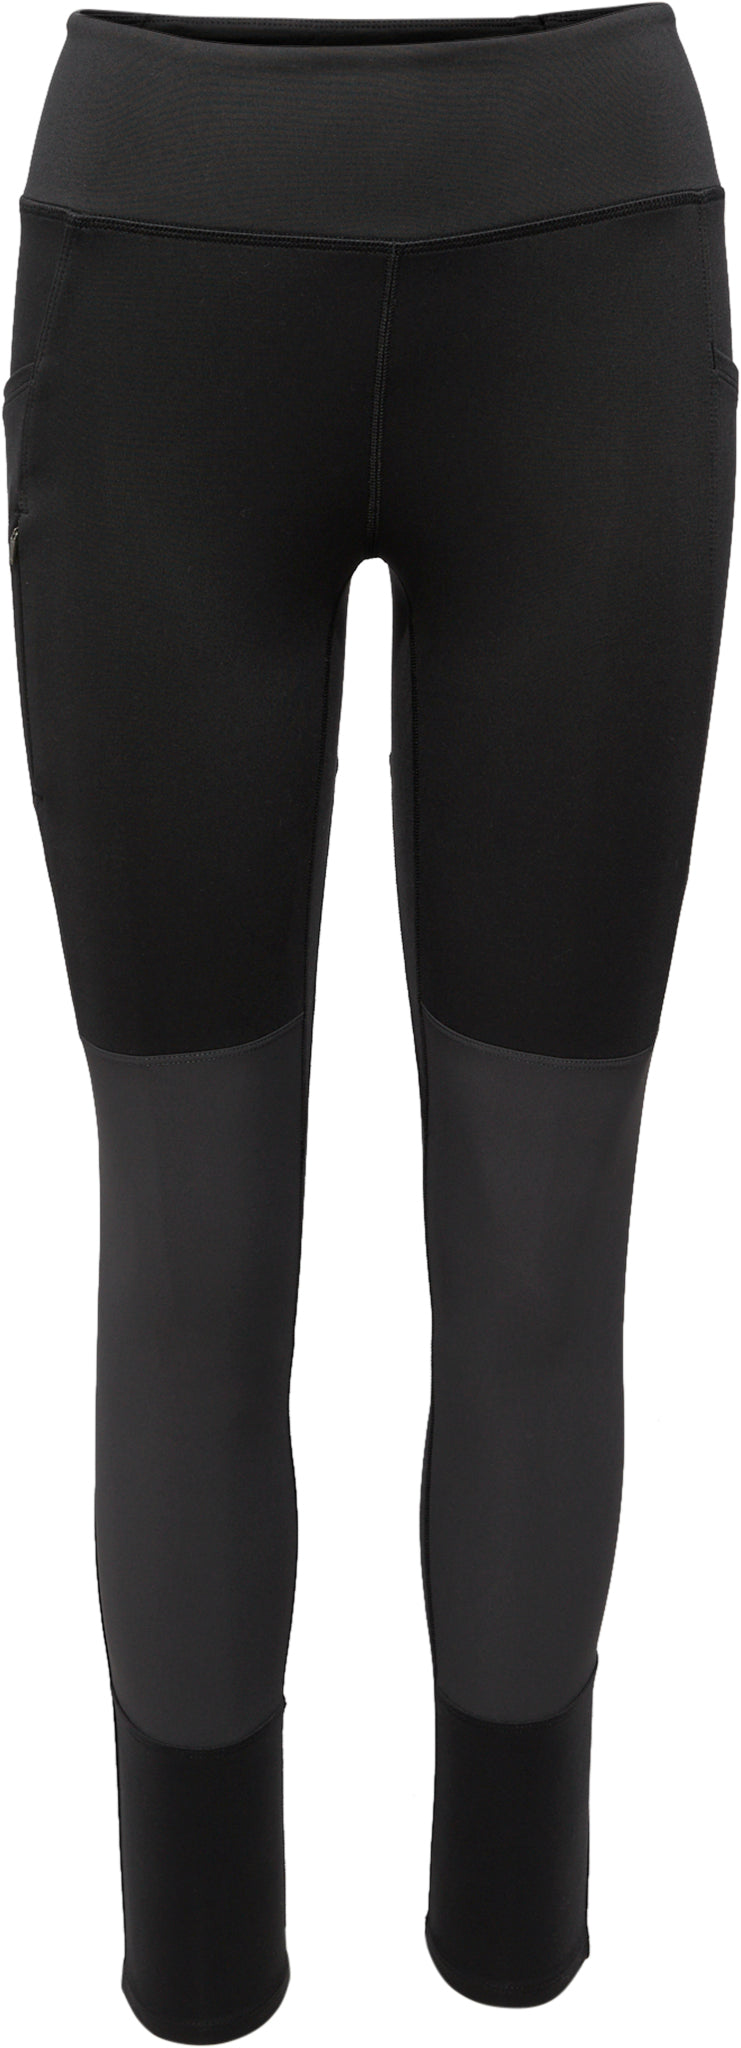 Patagonia Women's Pack Out Tights  Patagonia womens, Tights, Running tights